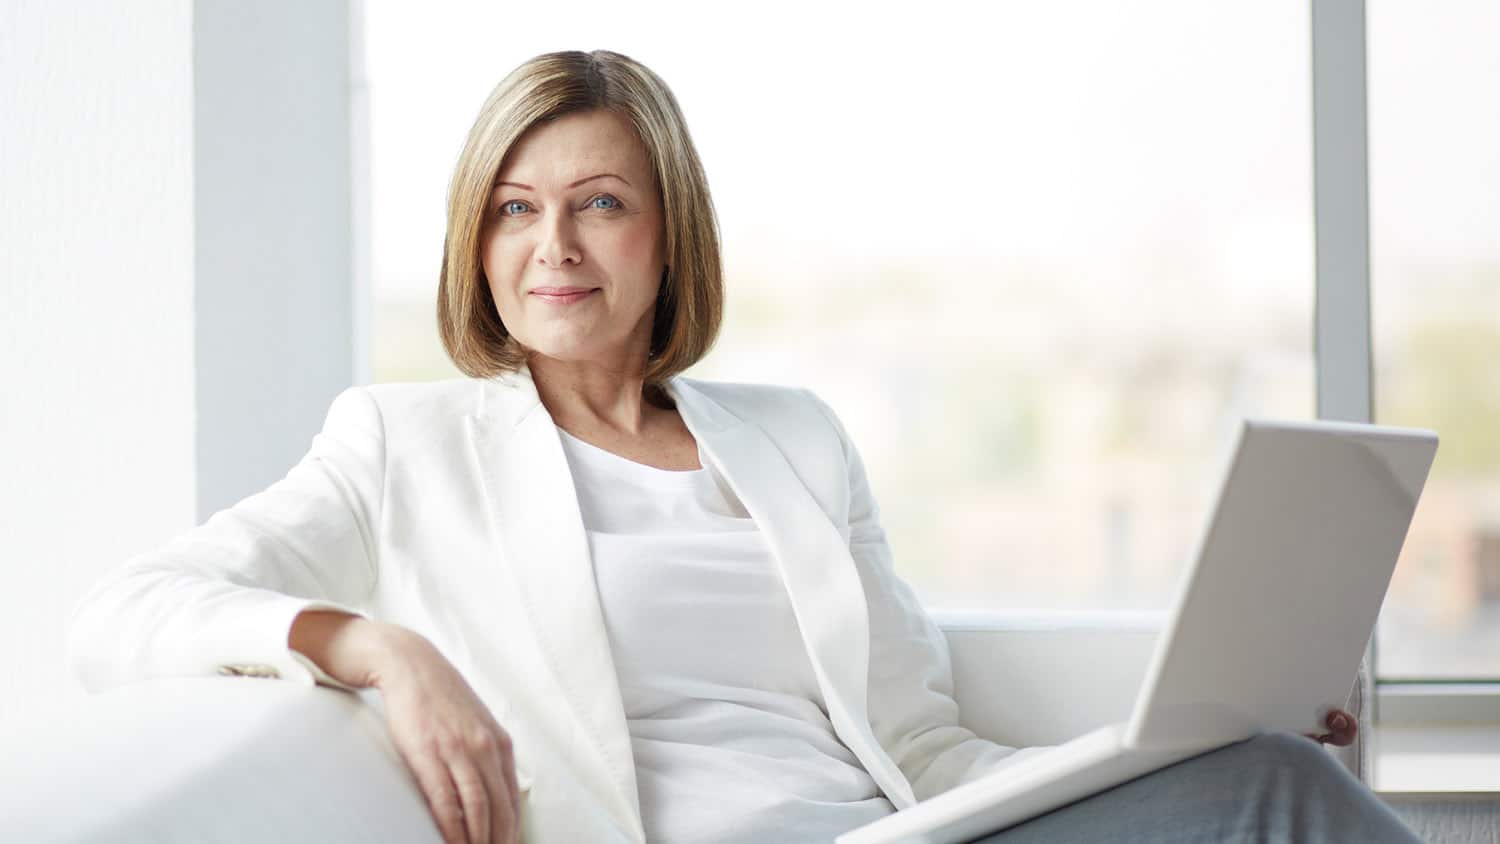 The Art of War: Advice for Older Women in Business.